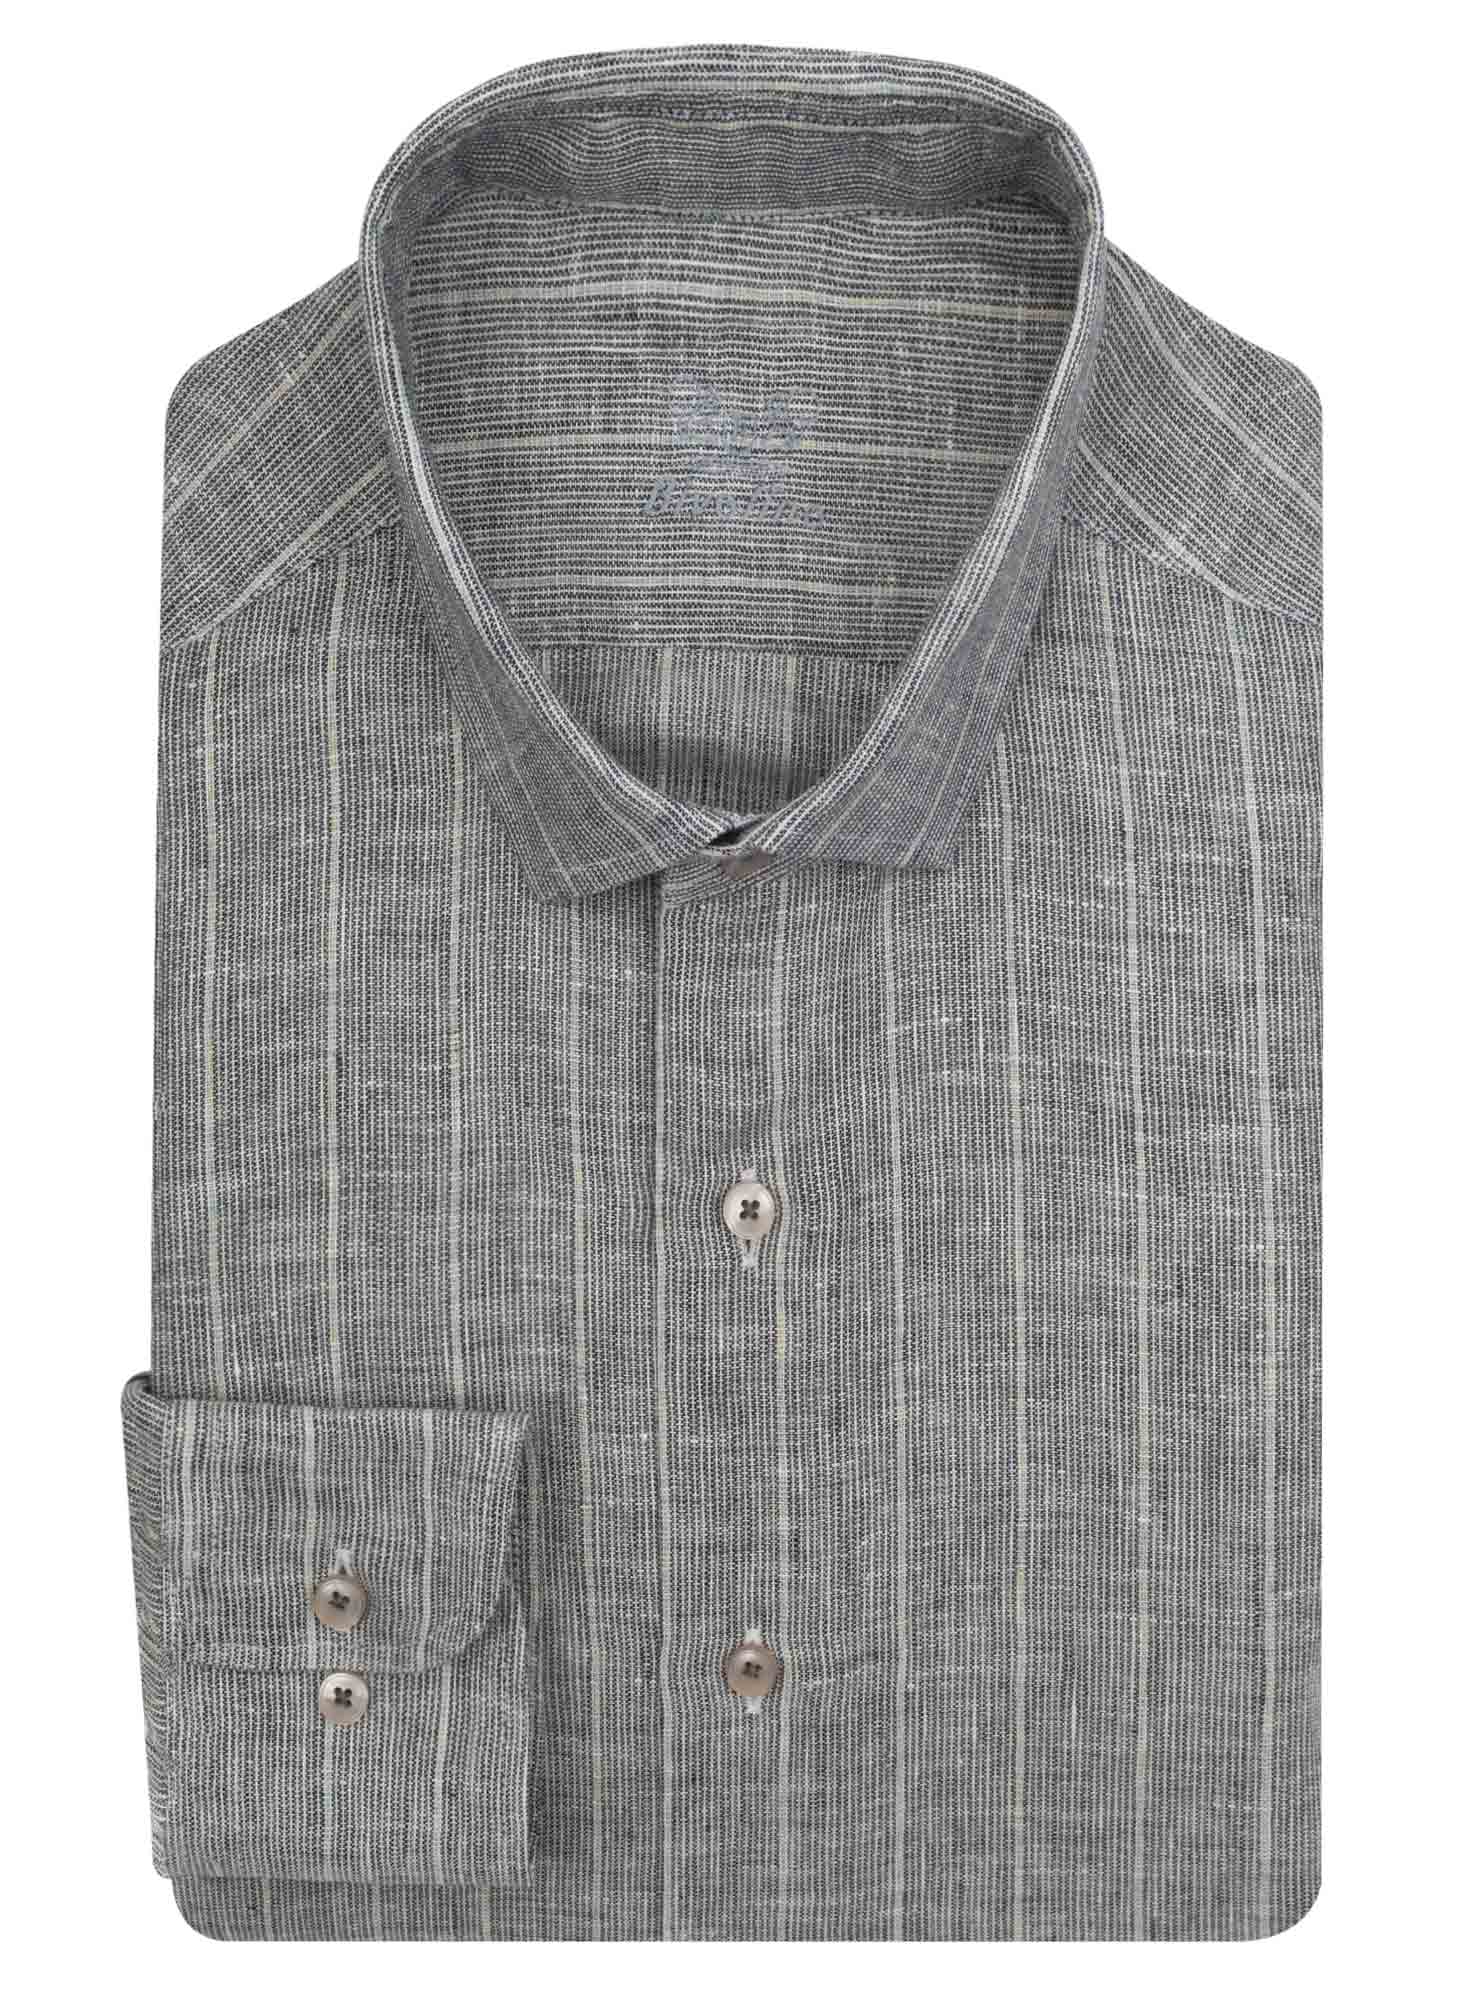 TRAPANI - chemise homme  Lin gris pinstripe - NEON 8